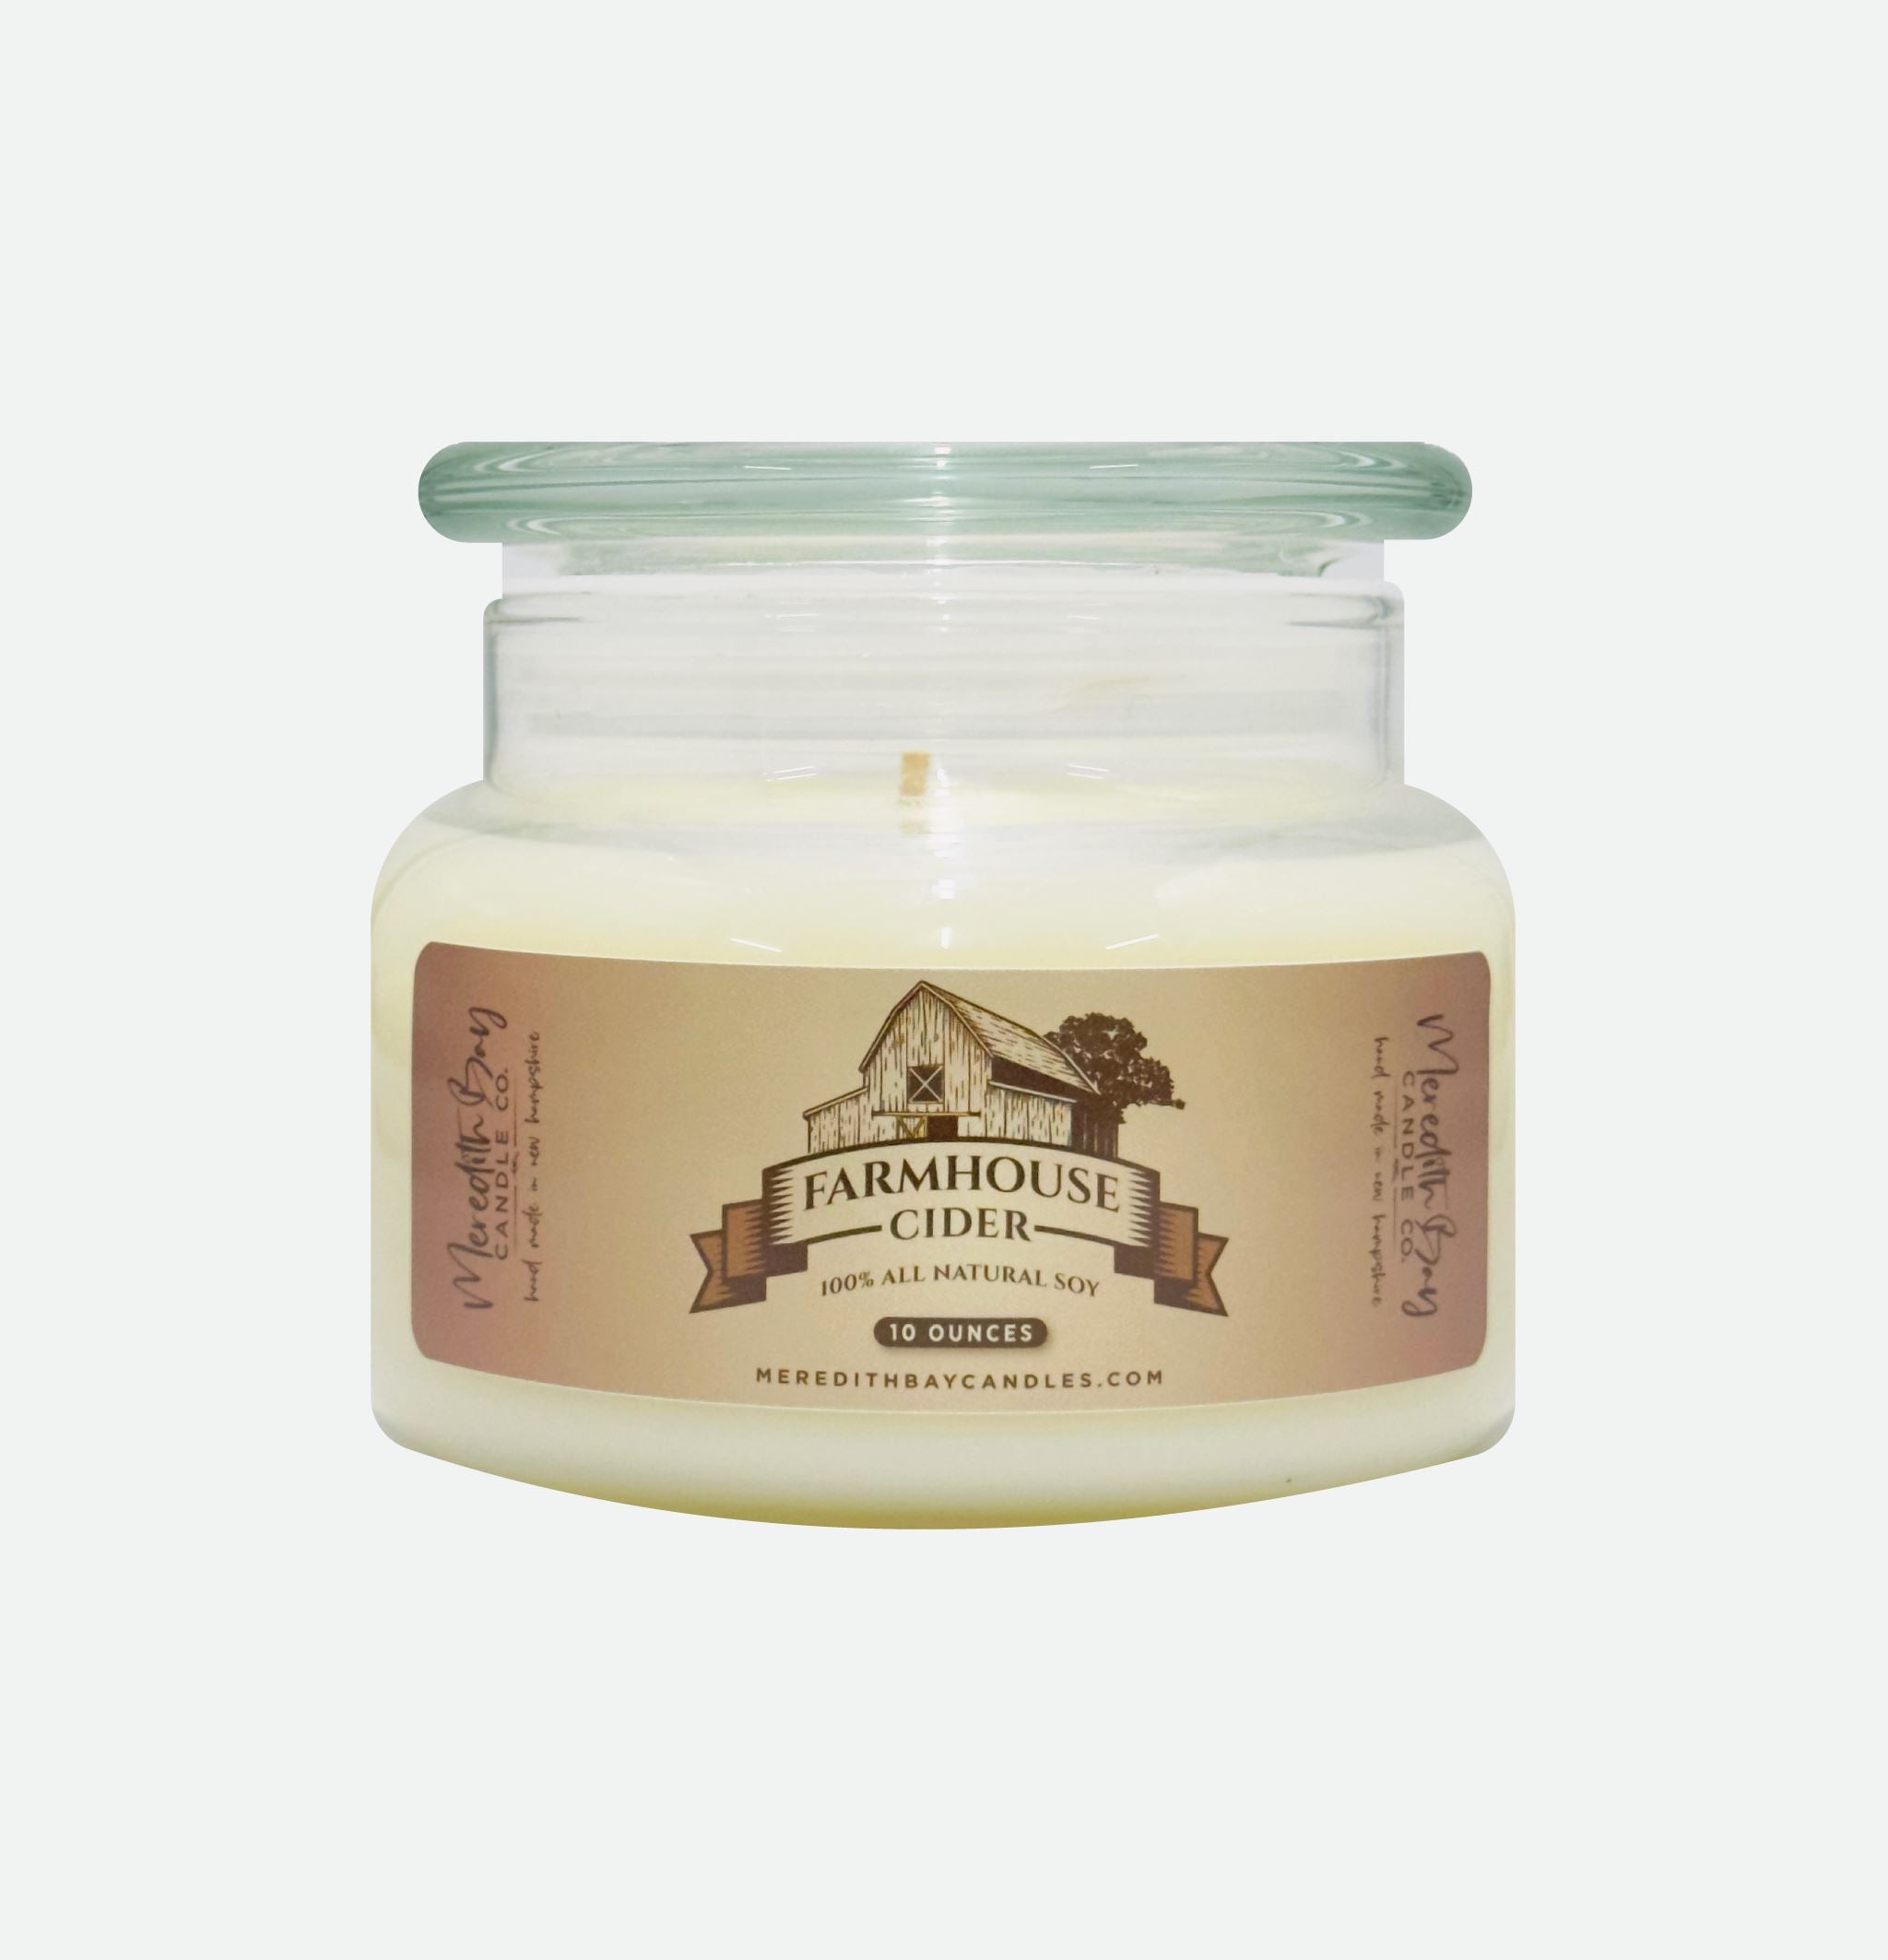 Farmhouse Cider Soy Candle Meredith Bay Candle Co 10 Oz 